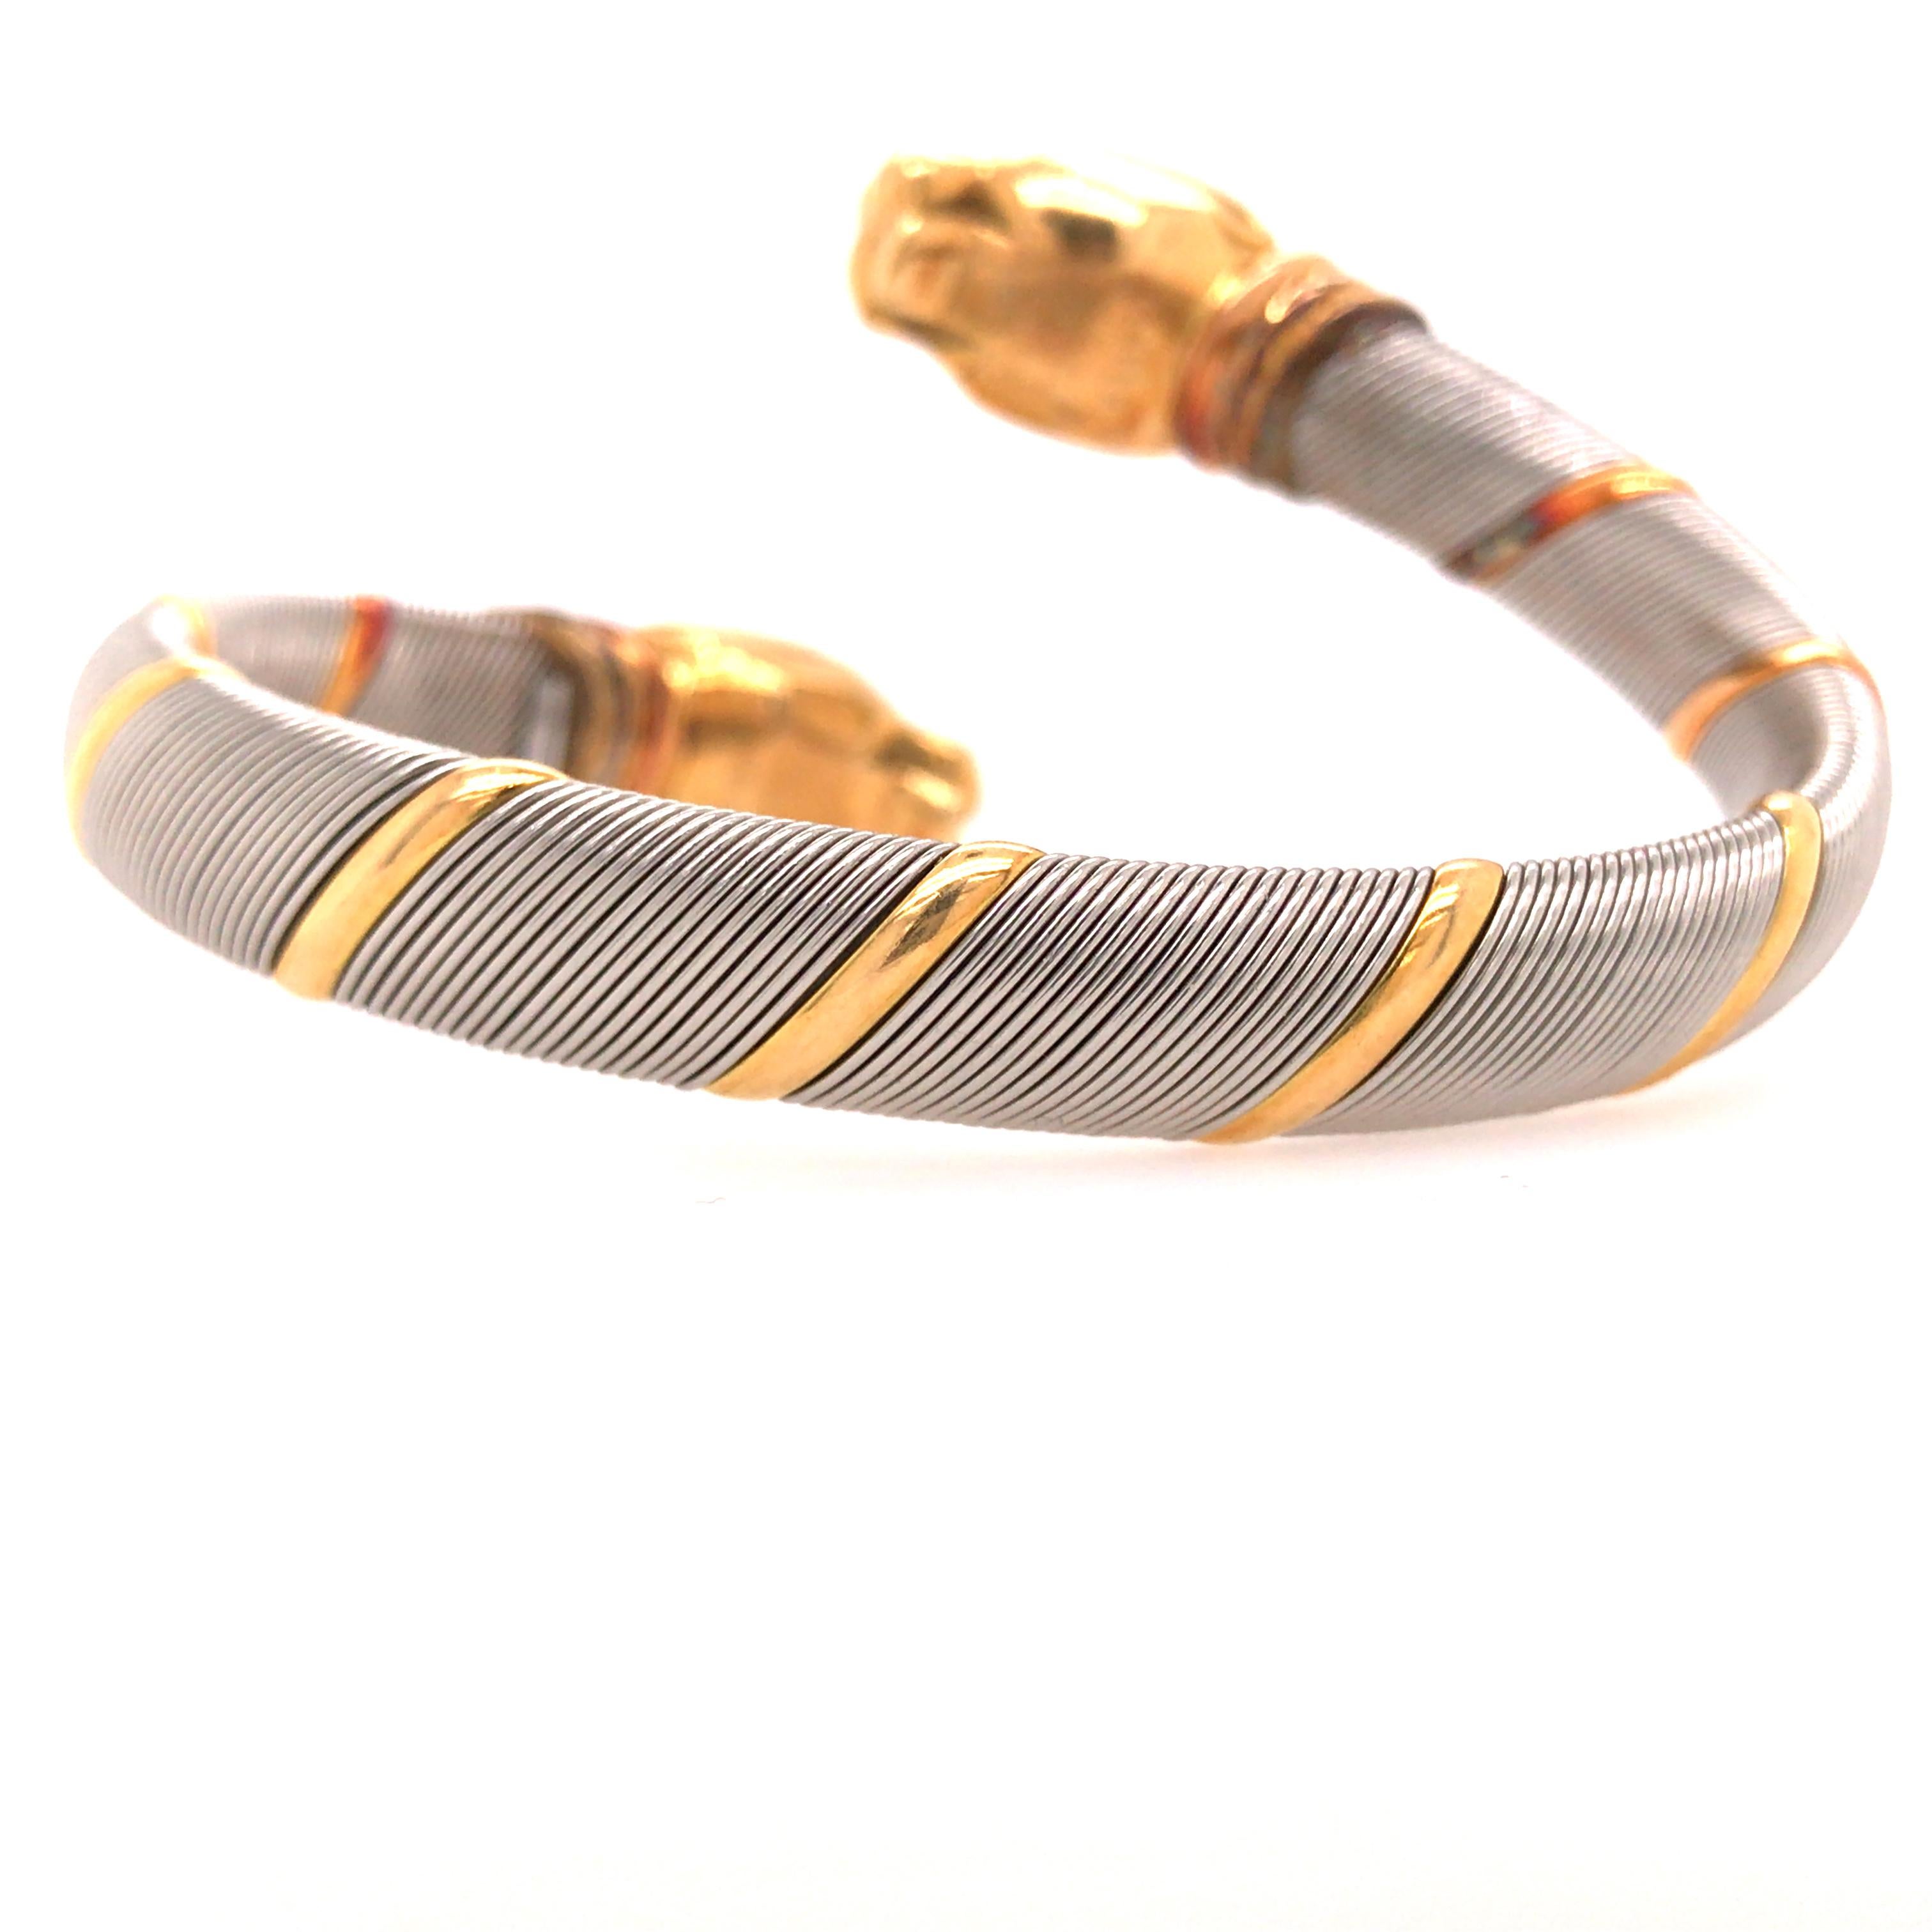 Cartier Panthere Stainless Steel 18K Tricolor Gold Crossover Bangle Bracelet.  The Bangle is made of Stainless Steel woven with 18K Yellow Gold Bands.  Partially flexible, easy to put on and remove yet secure.  Each Panthere head measures 3/4 inch